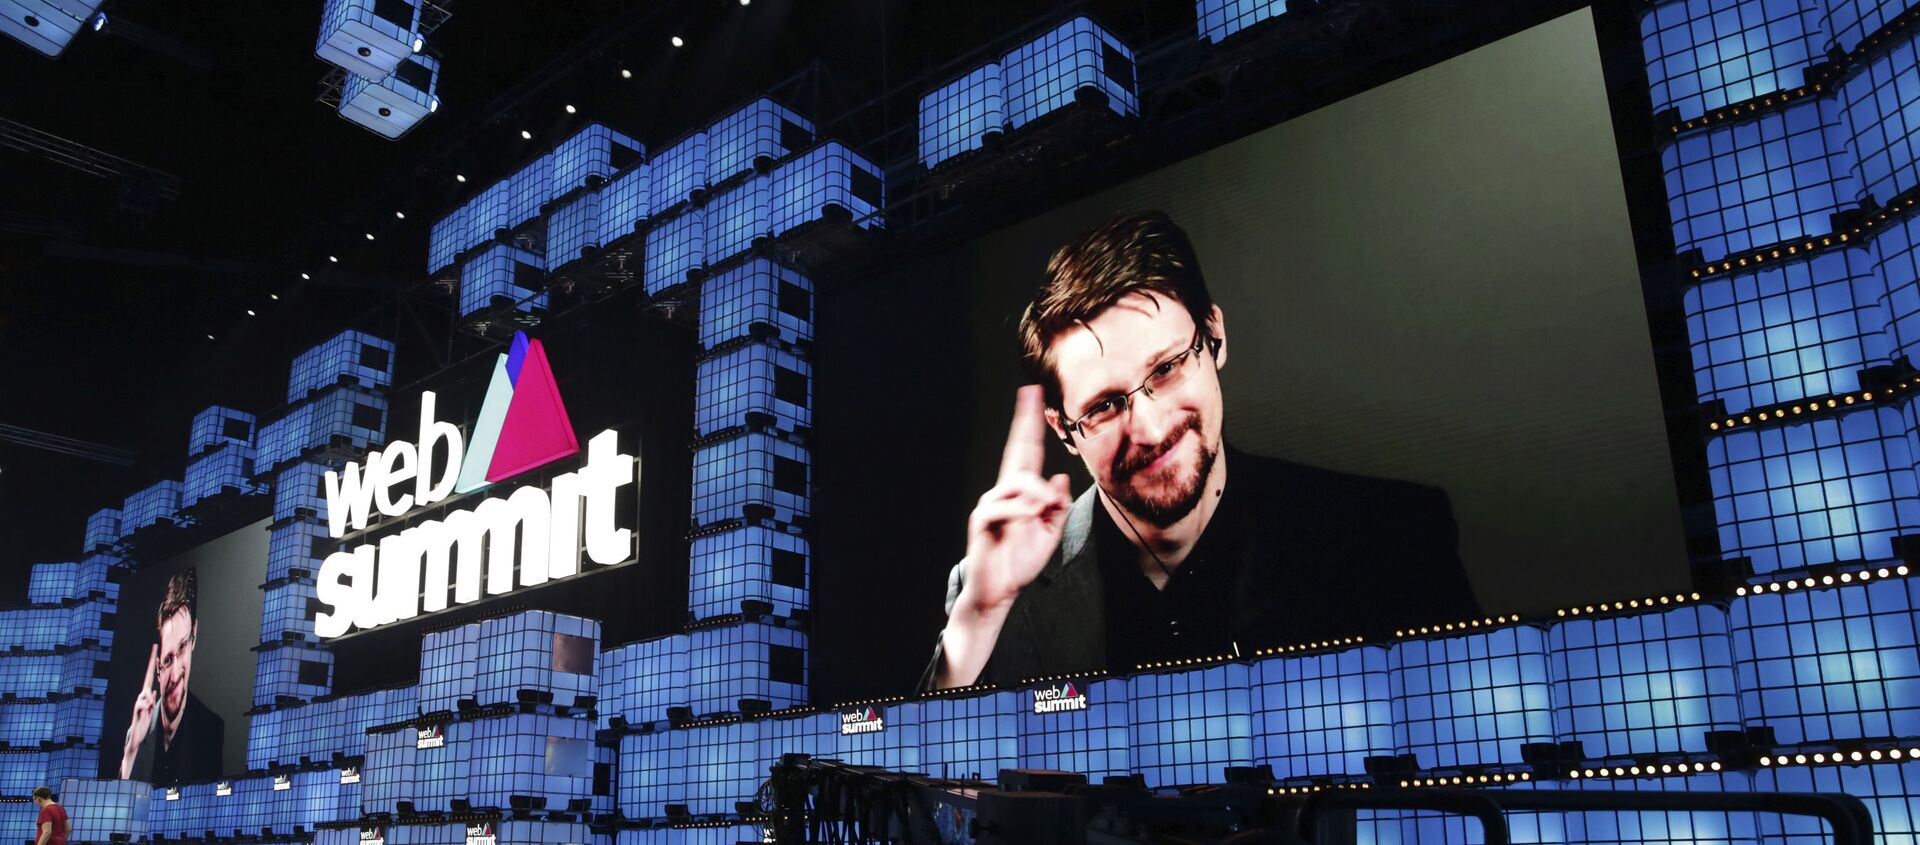 Former U.S. National Security Agency contractor Edward Snowden addresses attendees through video link at the Web Summit technology conference in Lisbon, Monday, Nov. 4, 2019. Snowden has been living in Russia to escape U.S. prosecution after leaking classified documents detailing government surveillance programs - Sputnik International, 1920